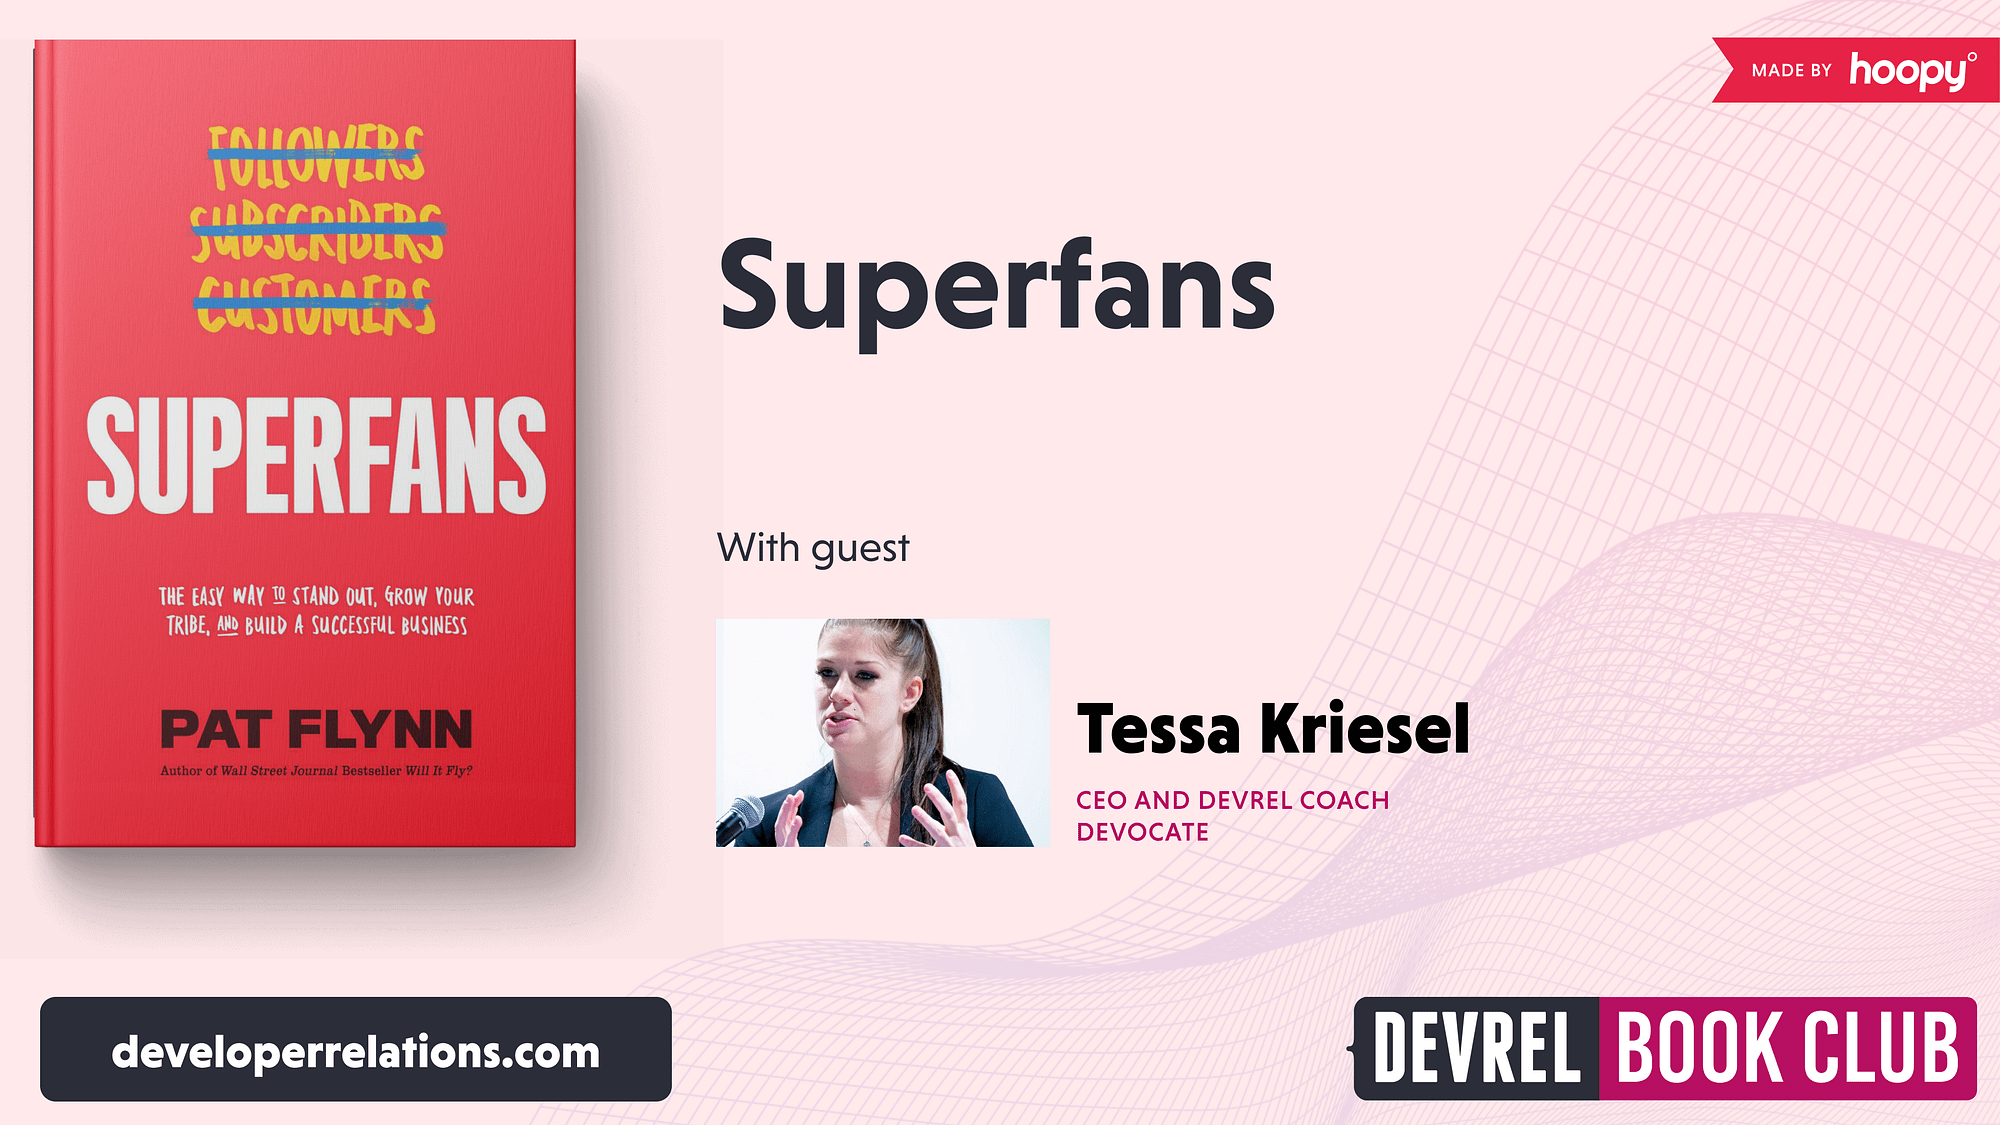 Superfans with guest Tessa Kriesel